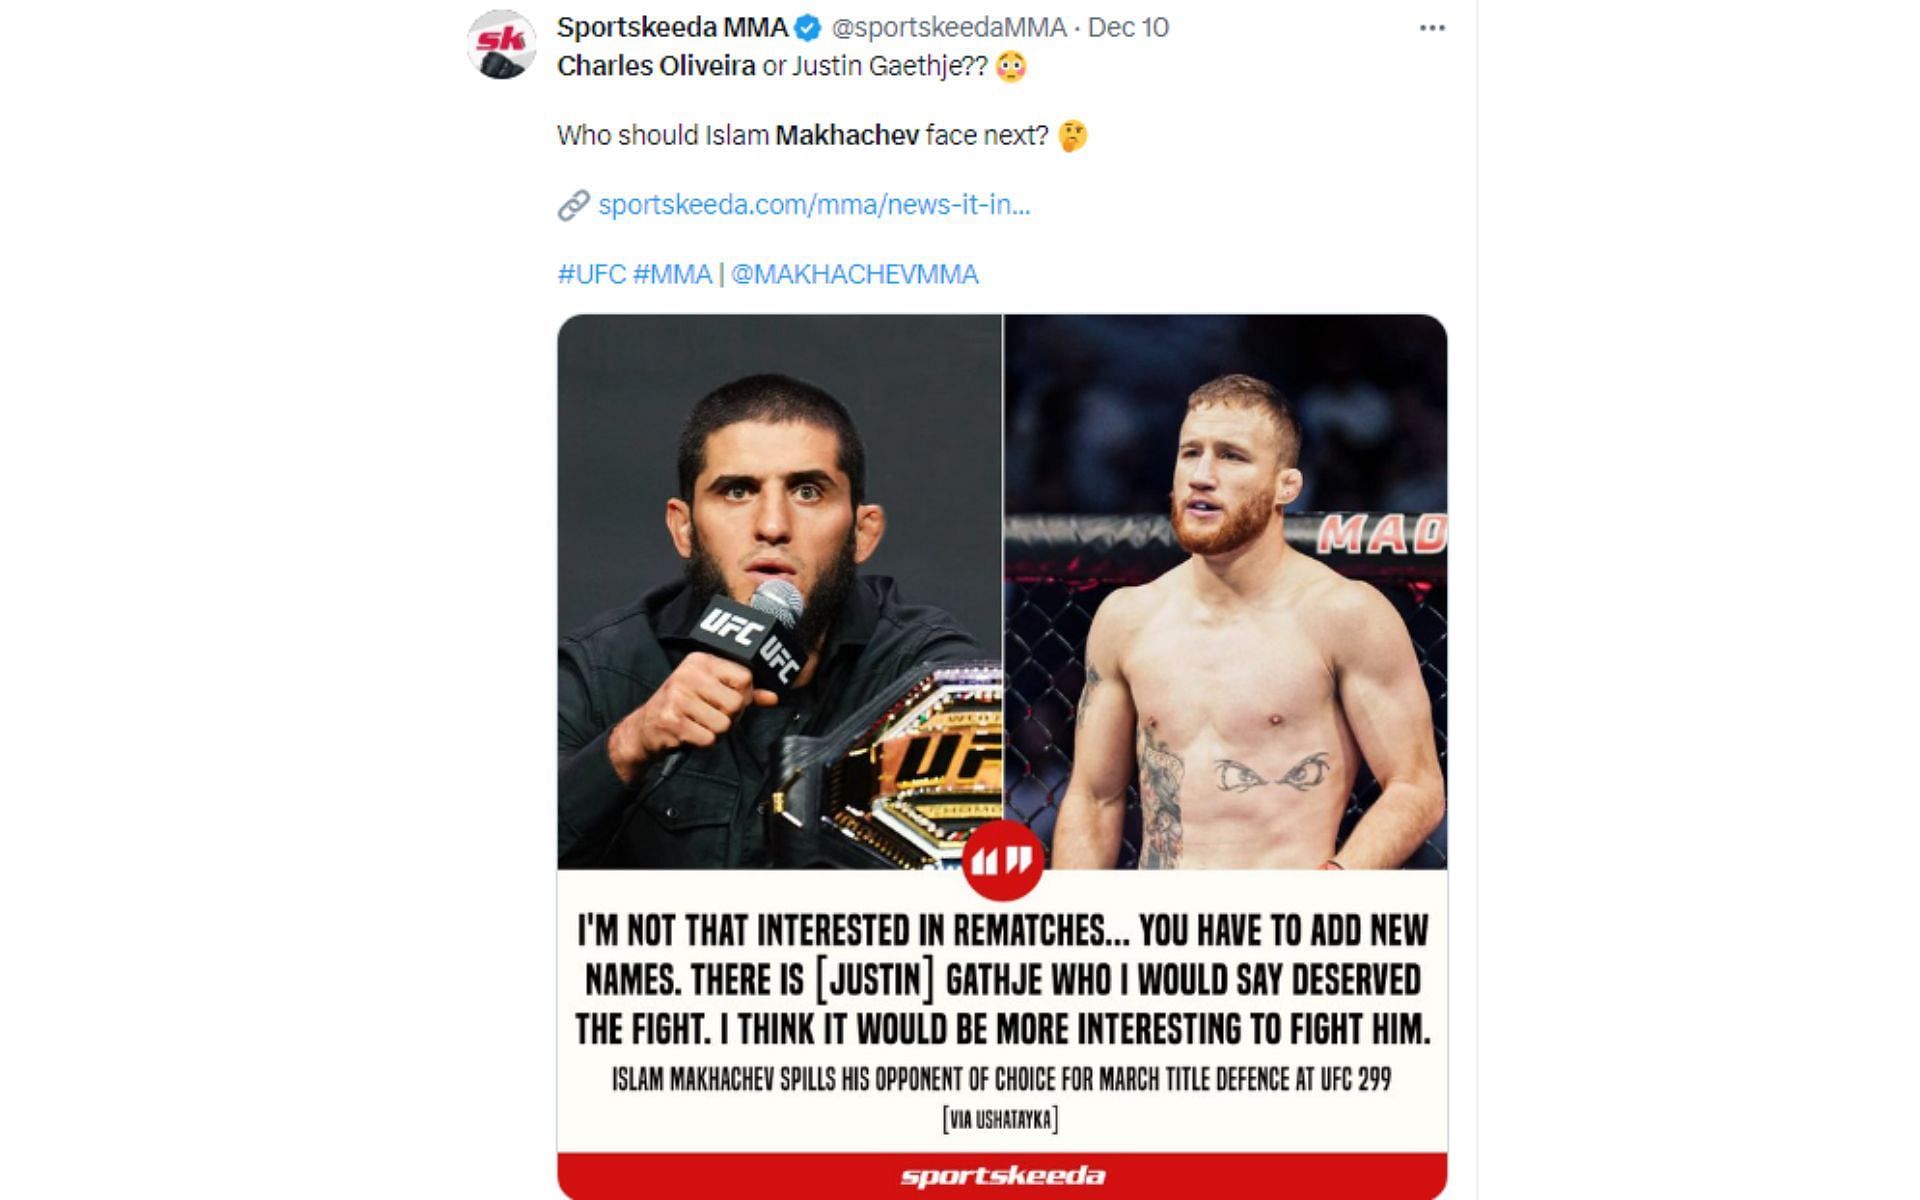 Tweet regarding Islam Makhachev being against a rematch with Oliveira